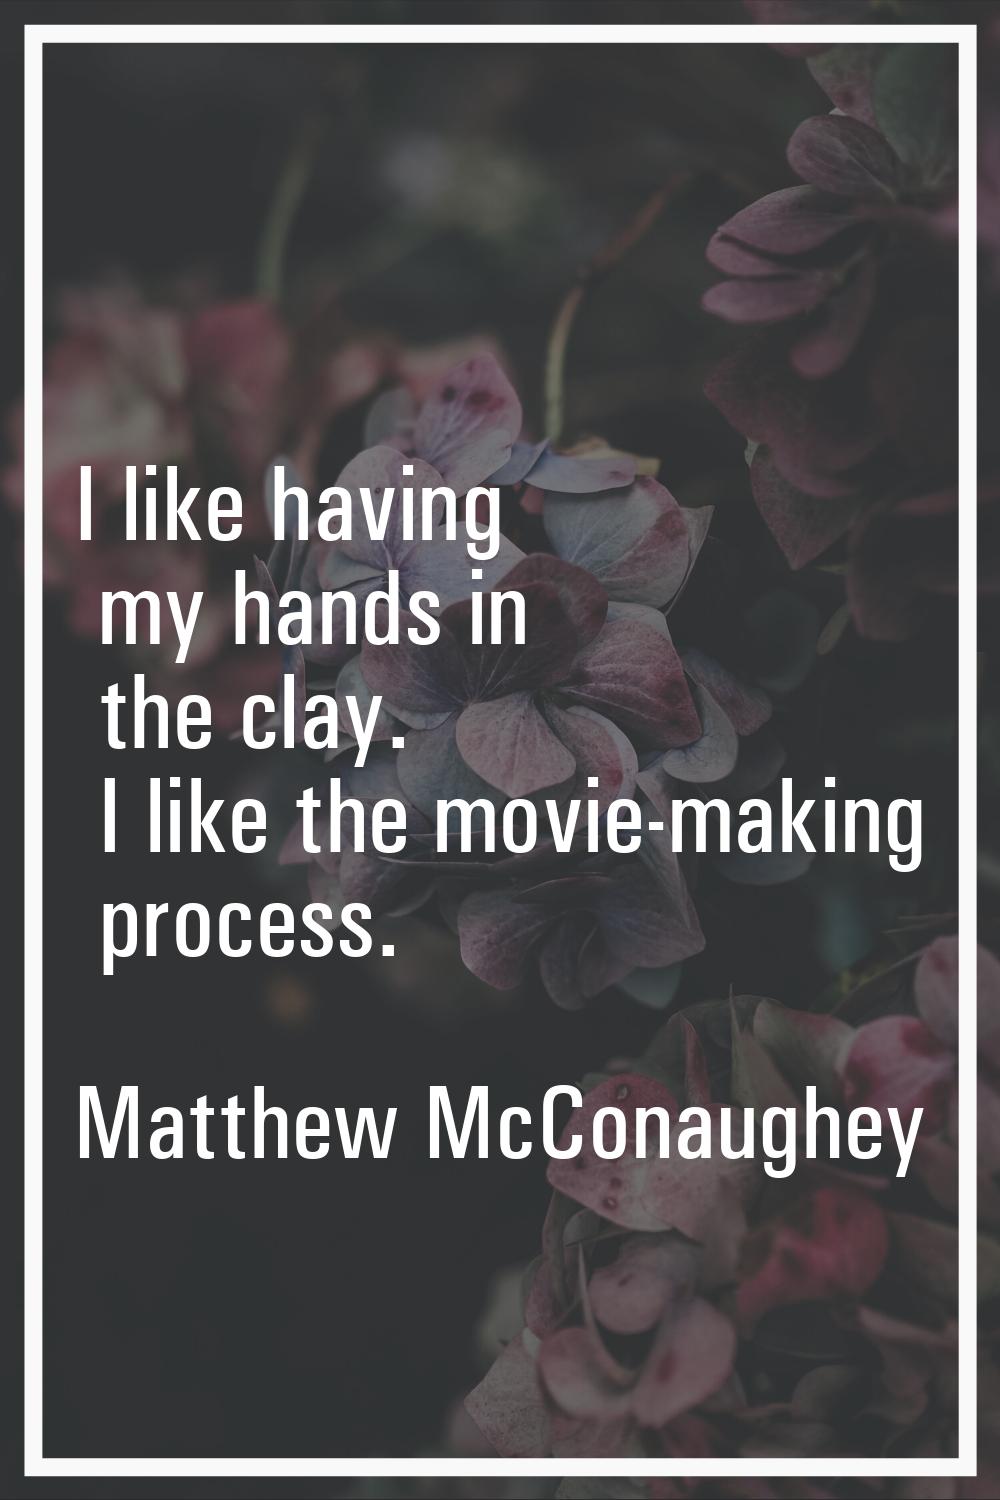 I like having my hands in the clay. I like the movie-making process.